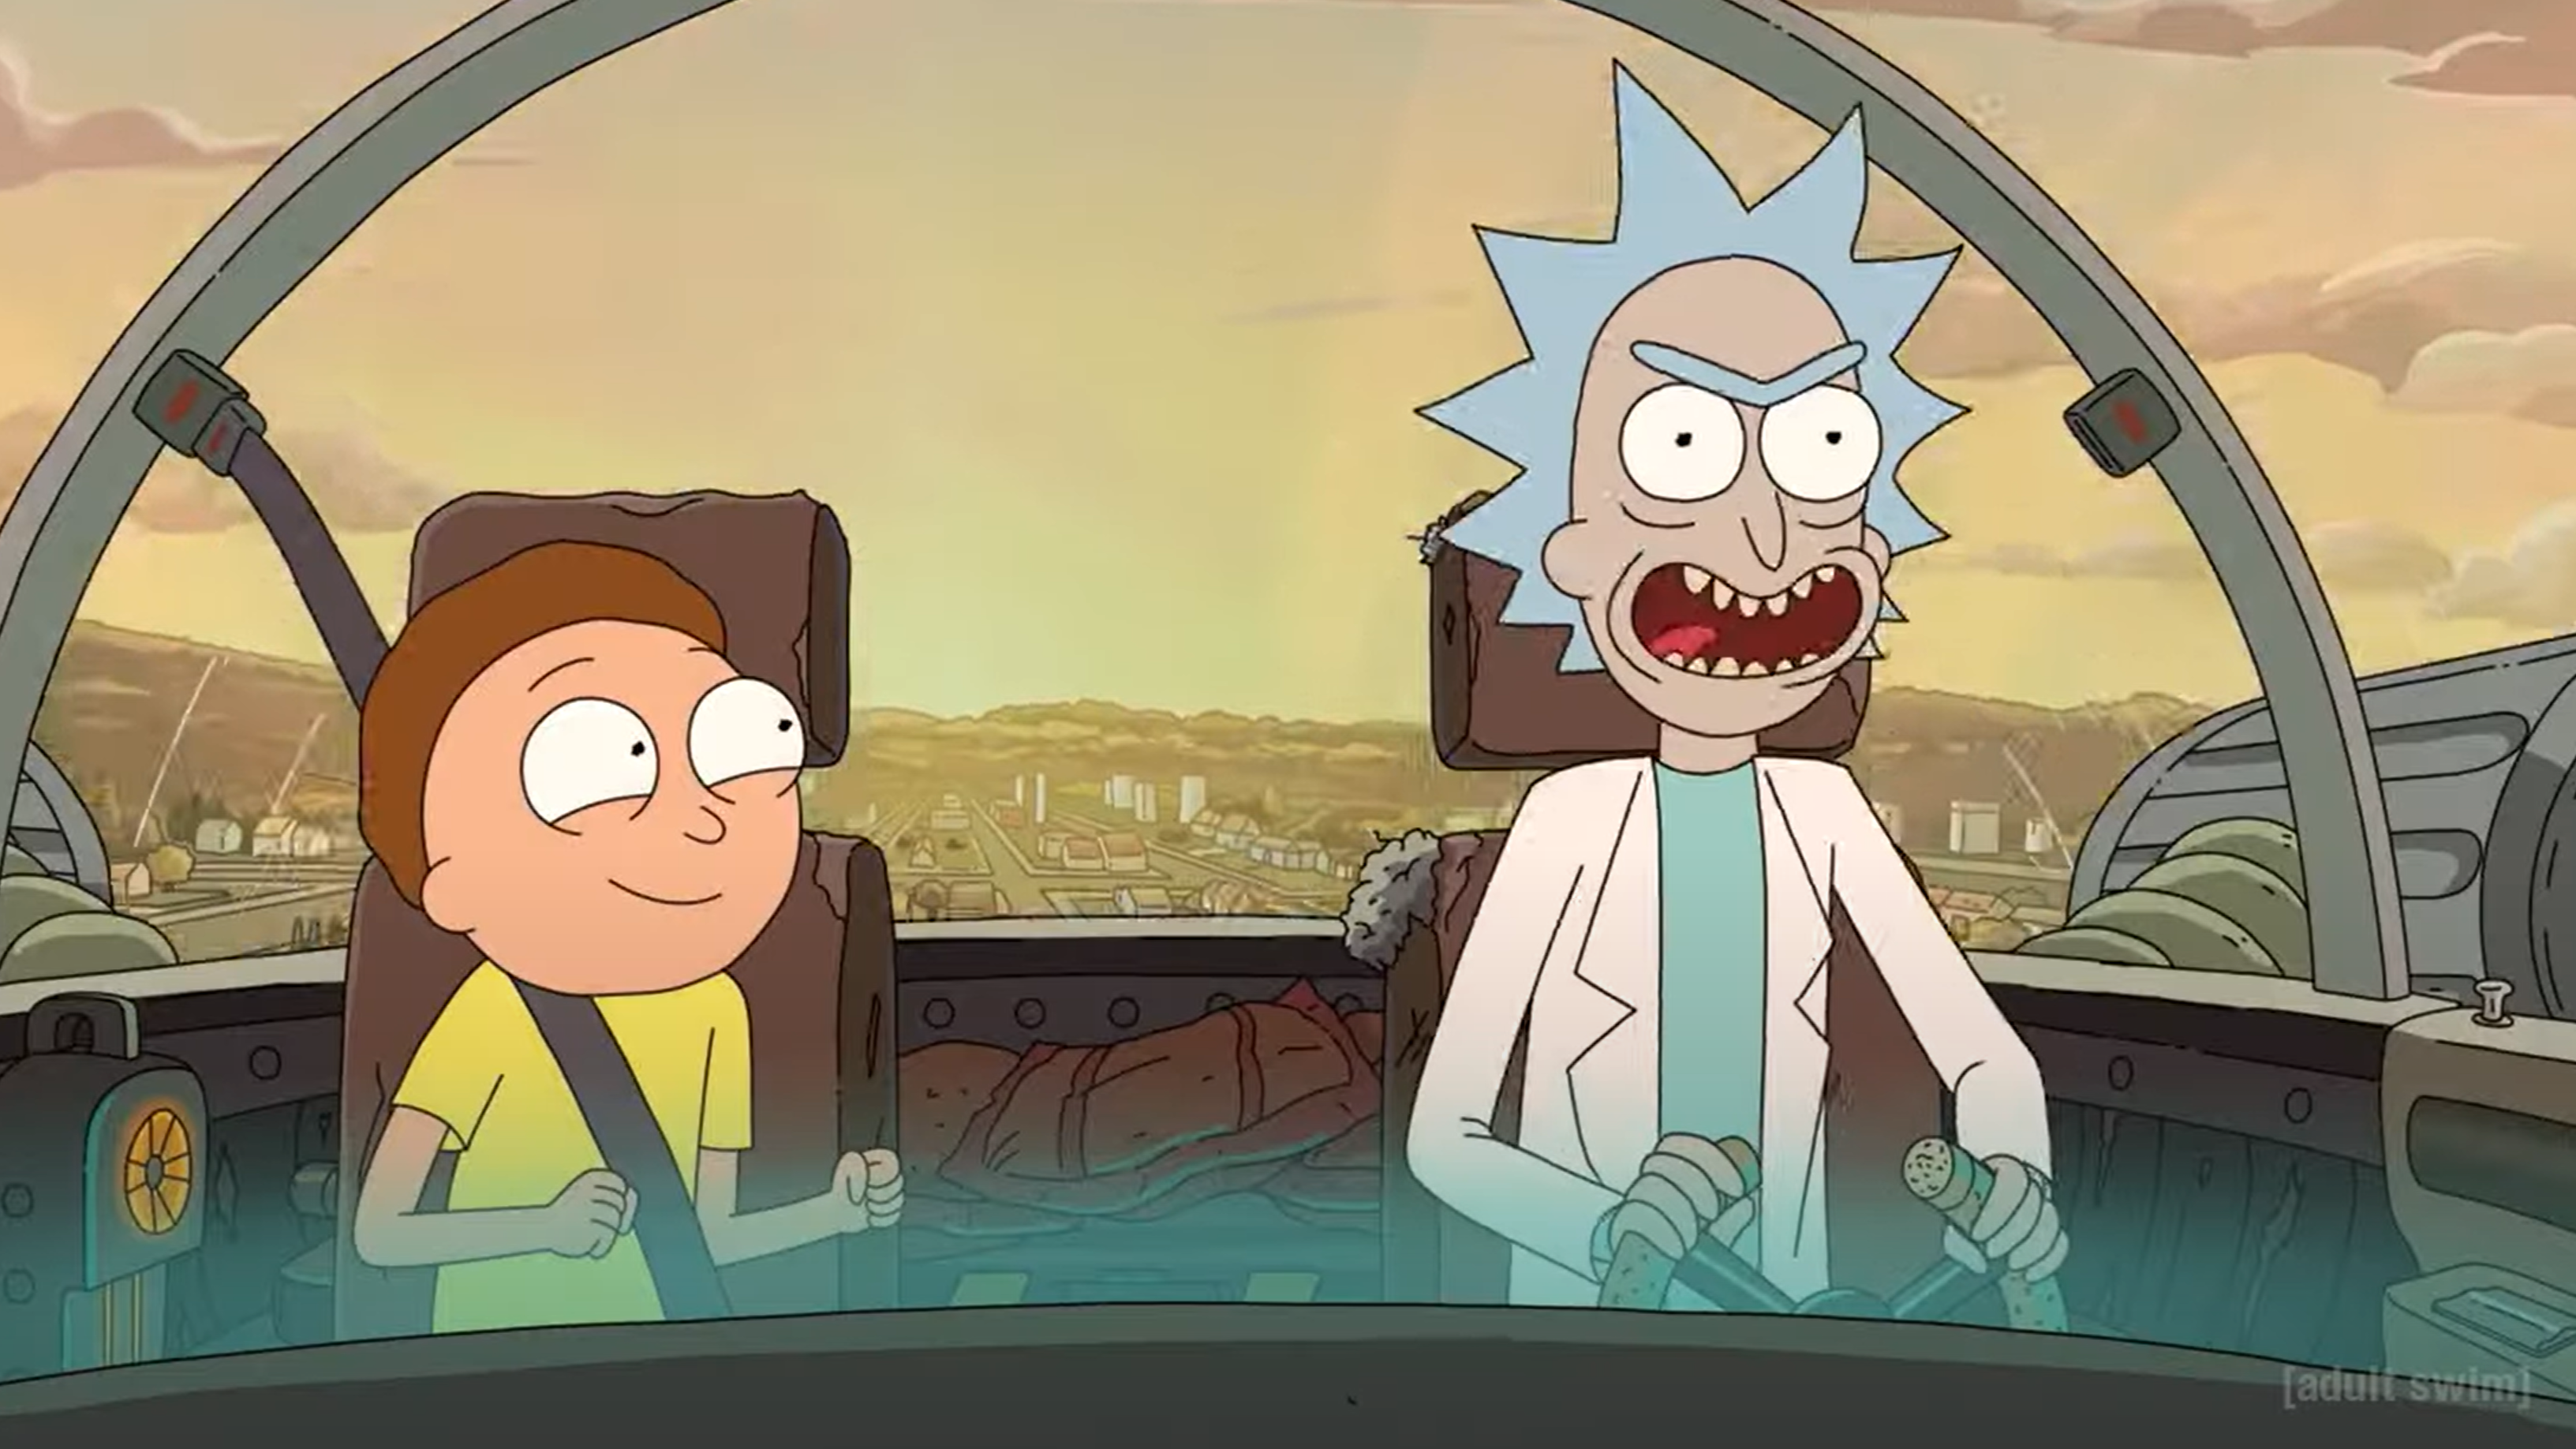 Rick and Morty from Rick and Morty.